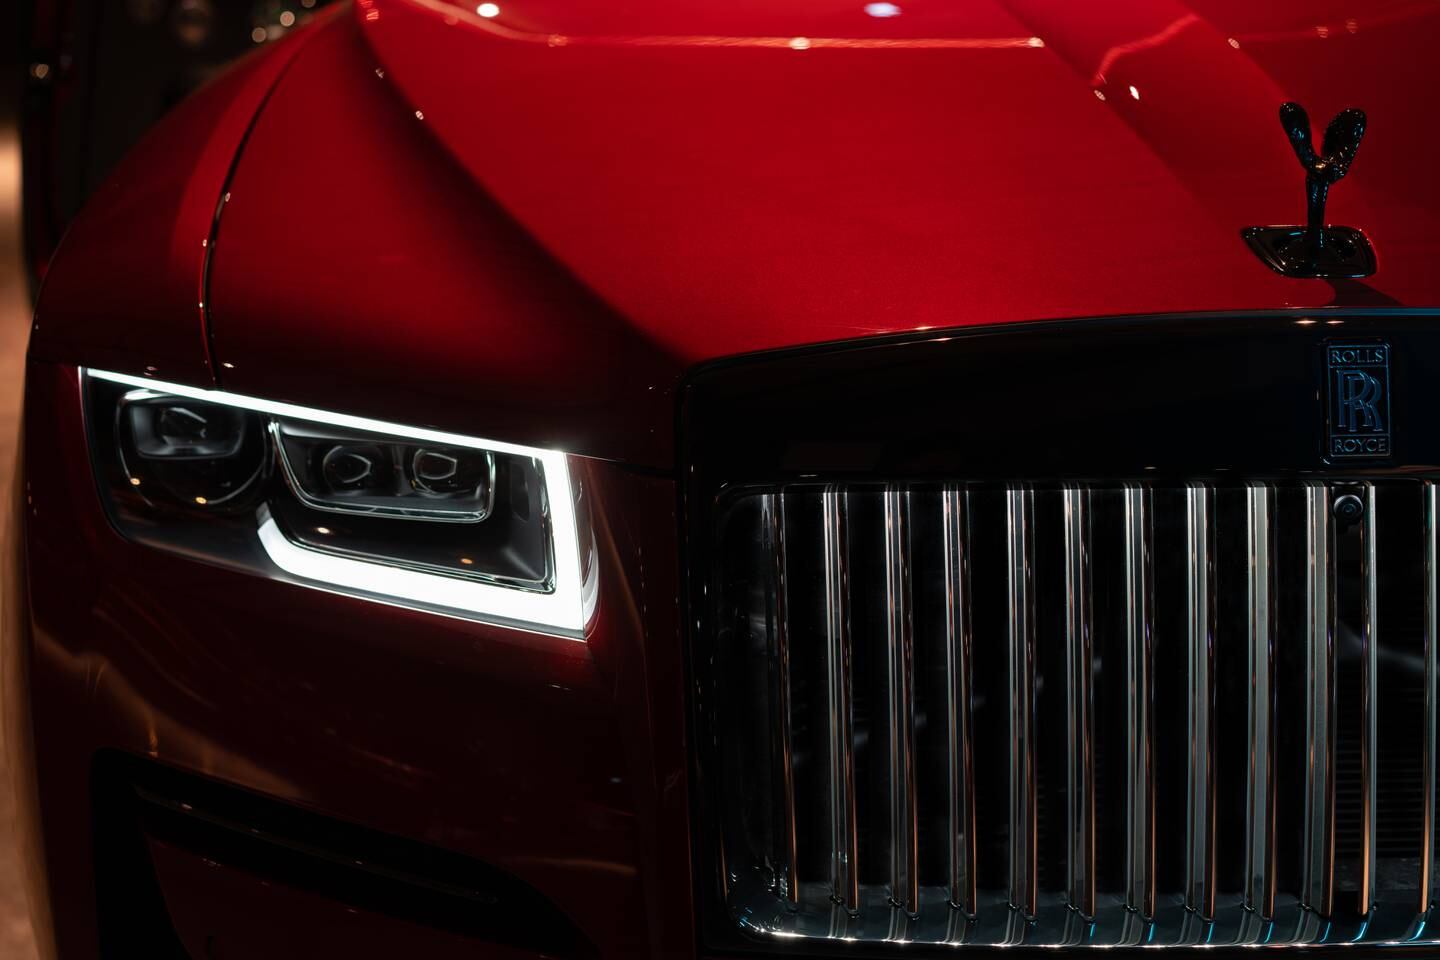 The Black Badge Ghost targets a new generation of Rolls-Royce fans. Photo: Rolls-Royce